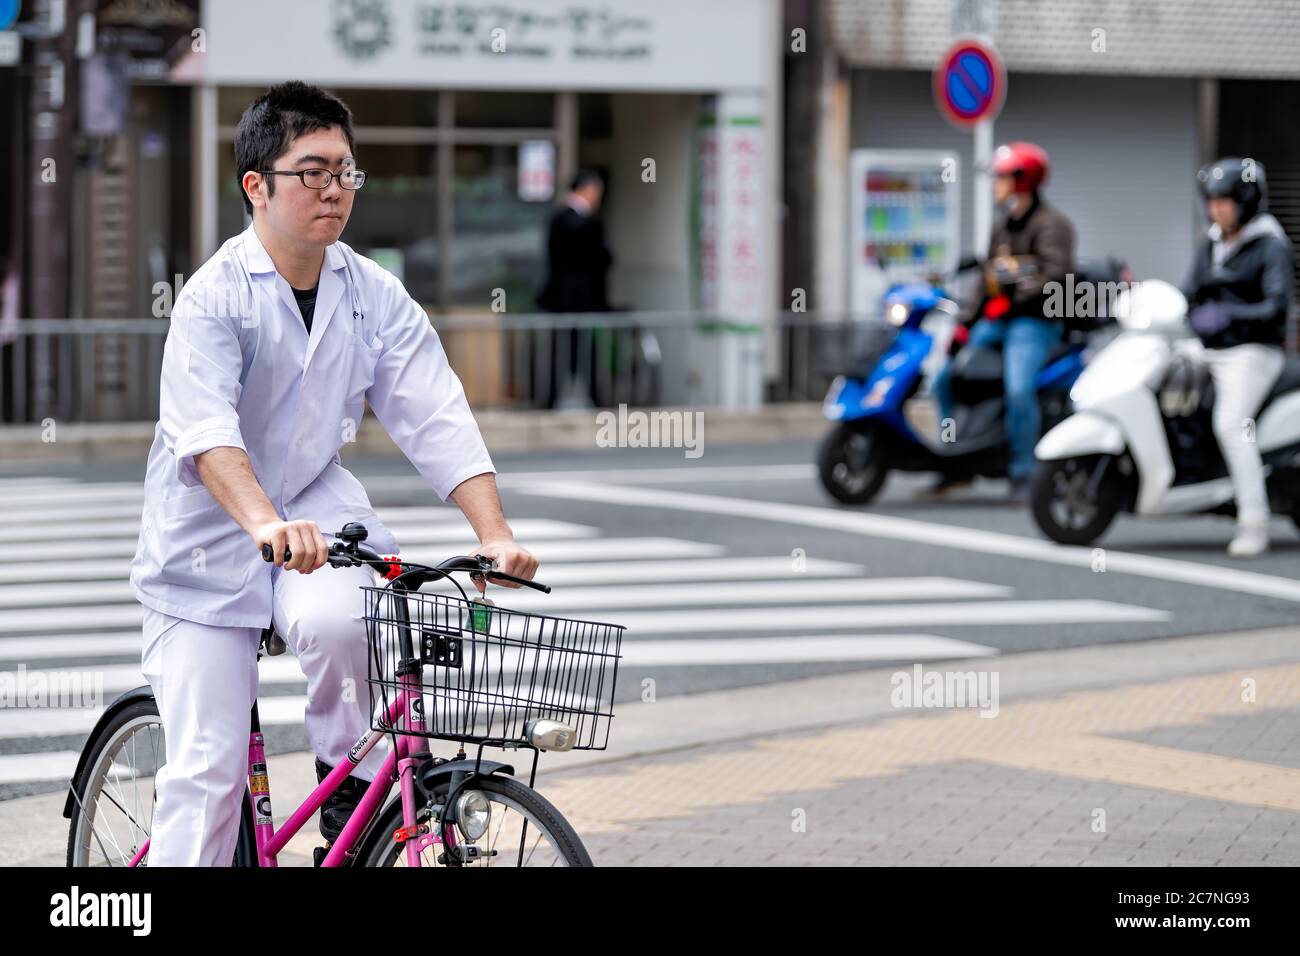 Kyoto, Japan - April 17, 2019: Japanese person on bicycle riding bike basket on street candid city life road in white uniform Stock Photo